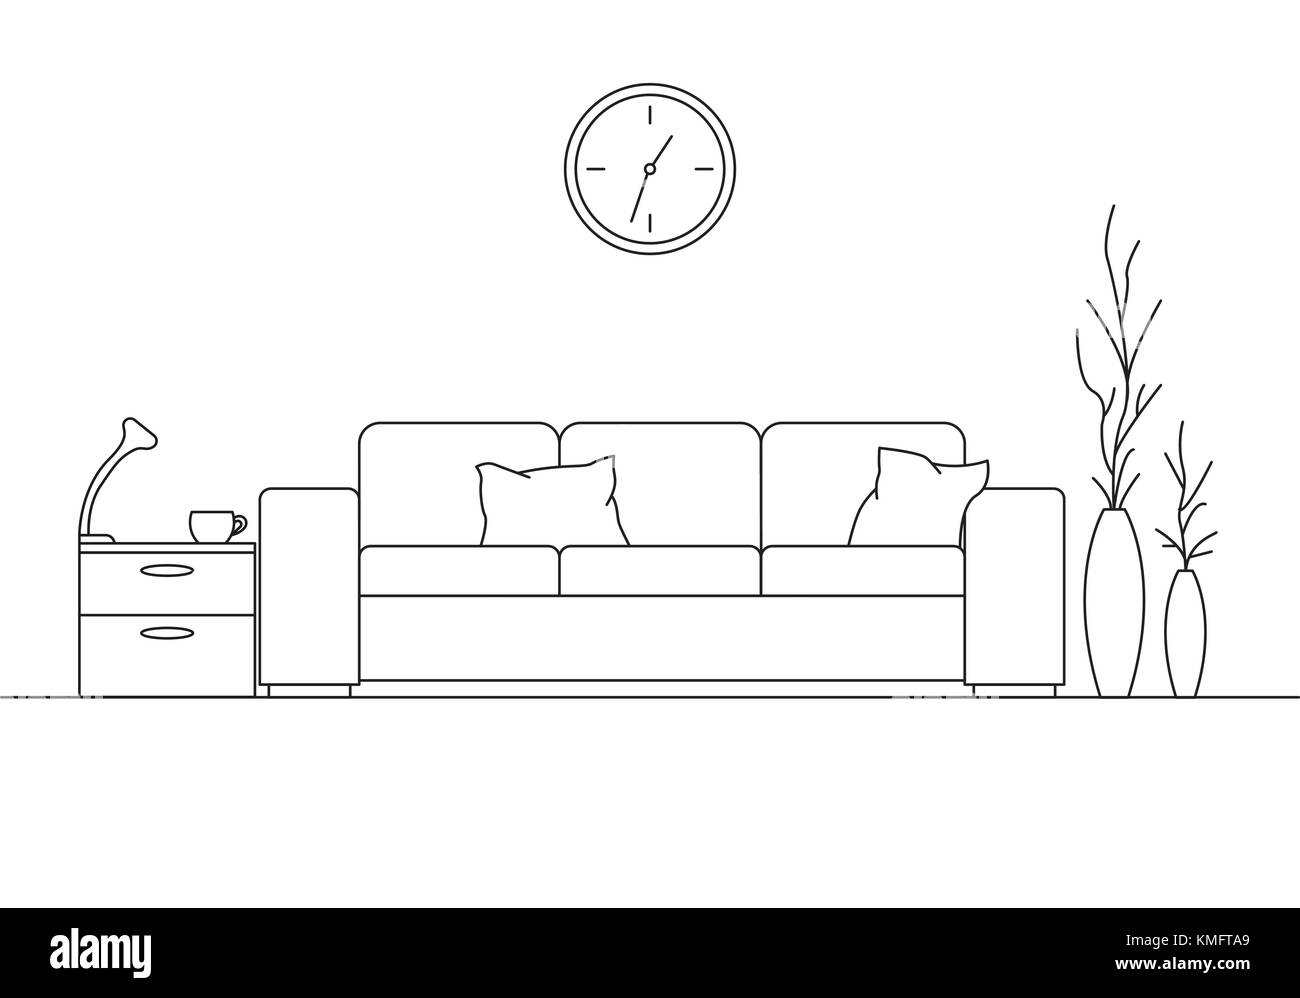 Modern interior. Sofa, lamp and bedside table. The clock hangs on the wall. Vector illustration in a linear style. Stock Vector